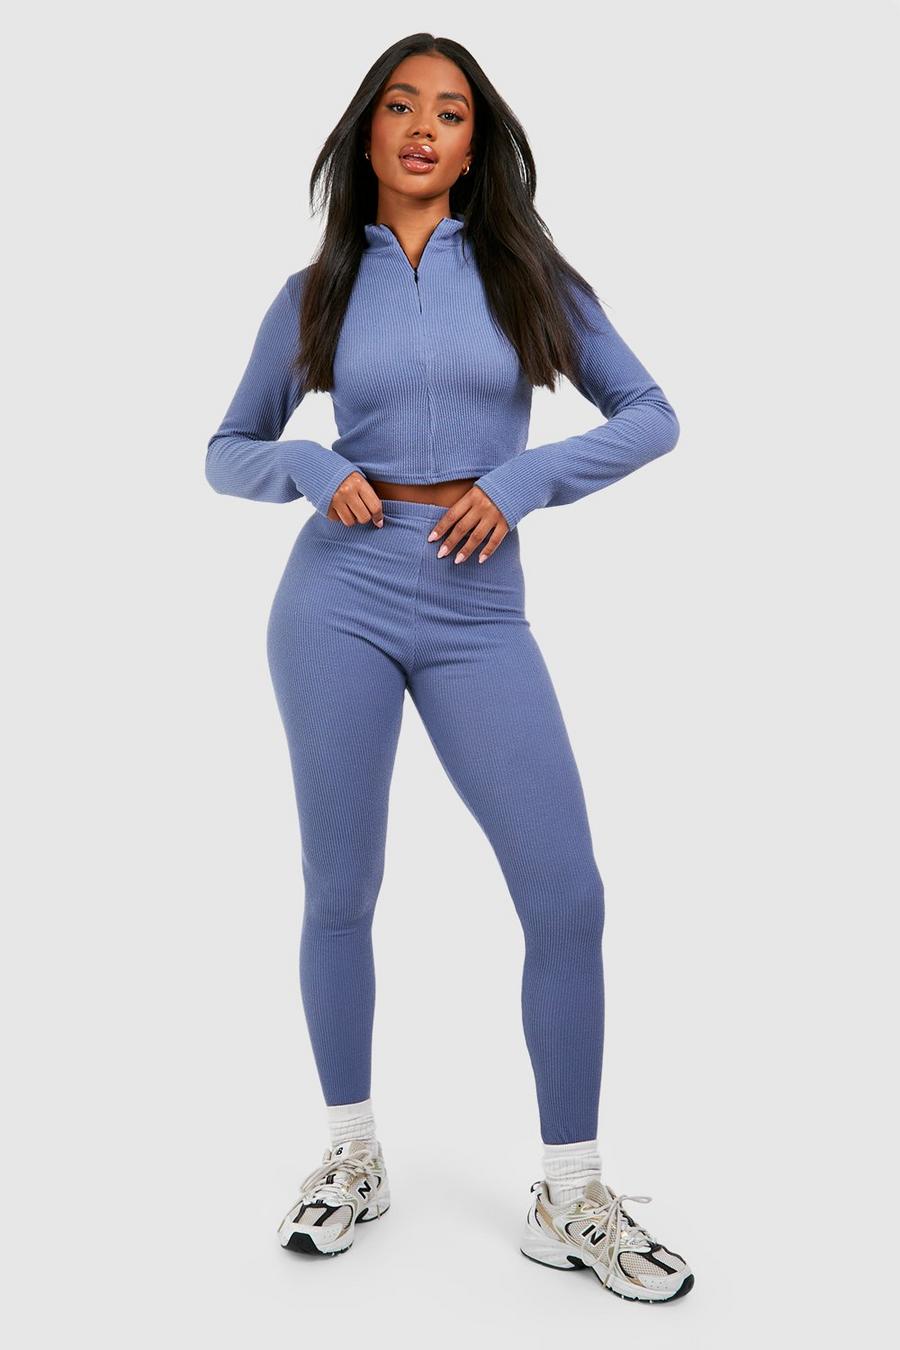 Ribbed High Waist Elasticated Leggings - 5 Colours - Just $5